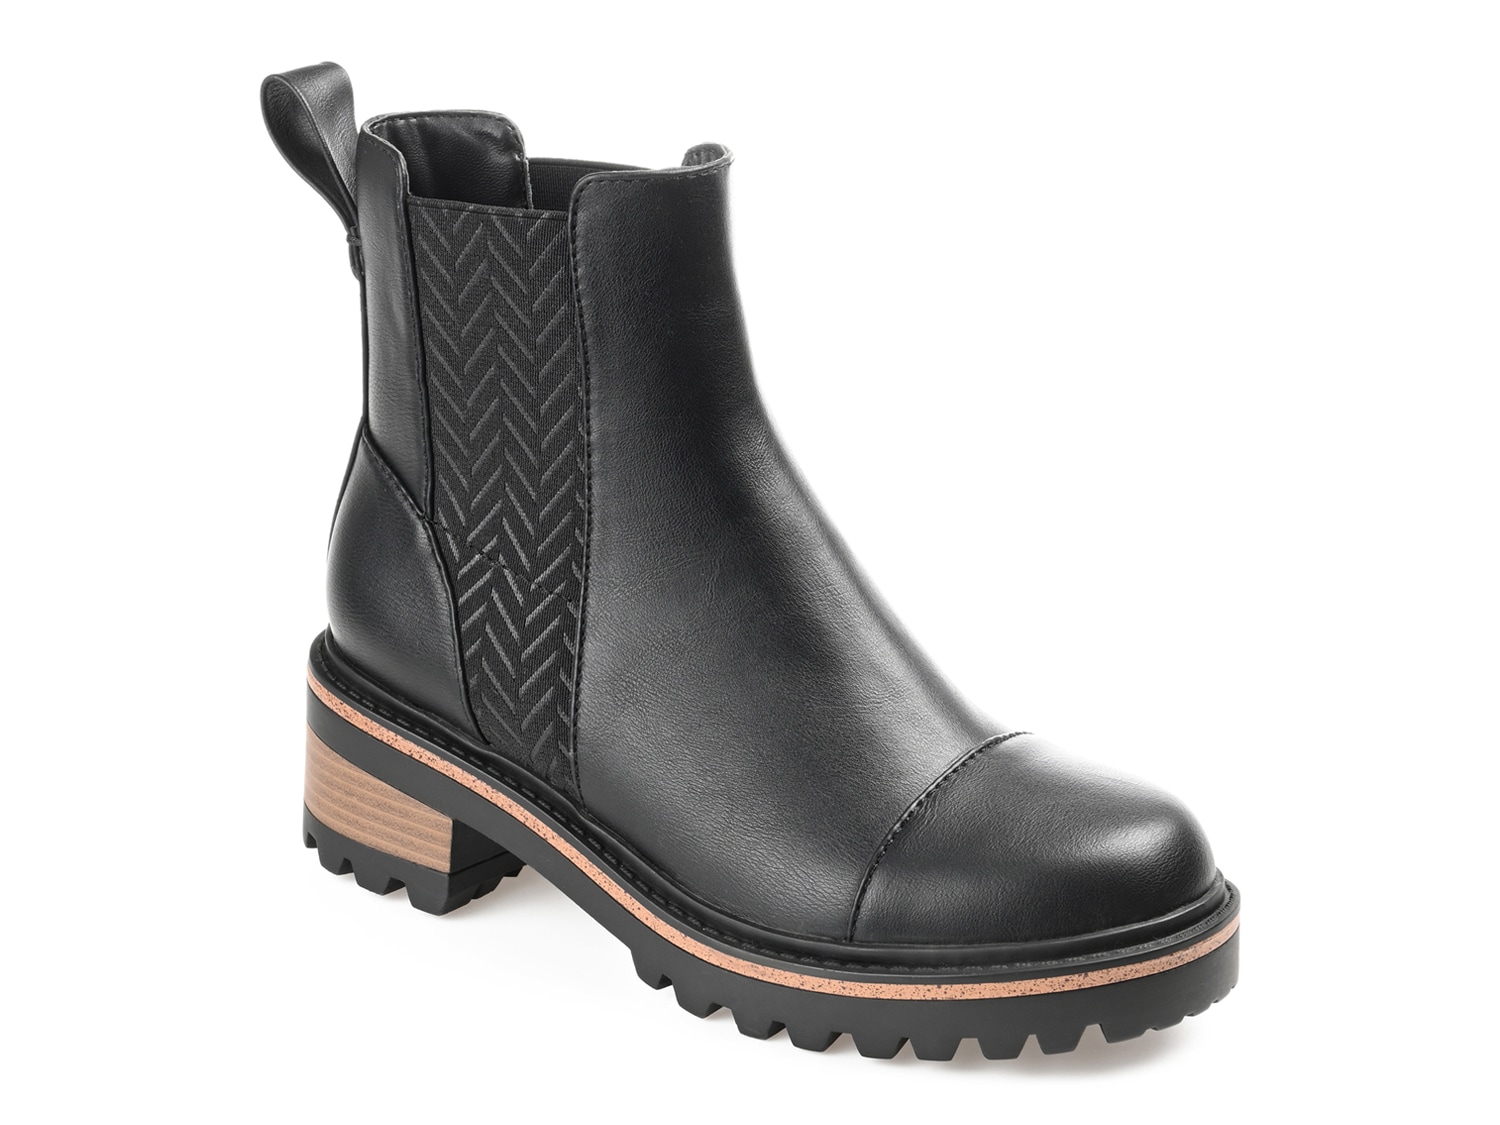 Journee Collection Mirette Chelsea Boot - Free Shipping | DSW